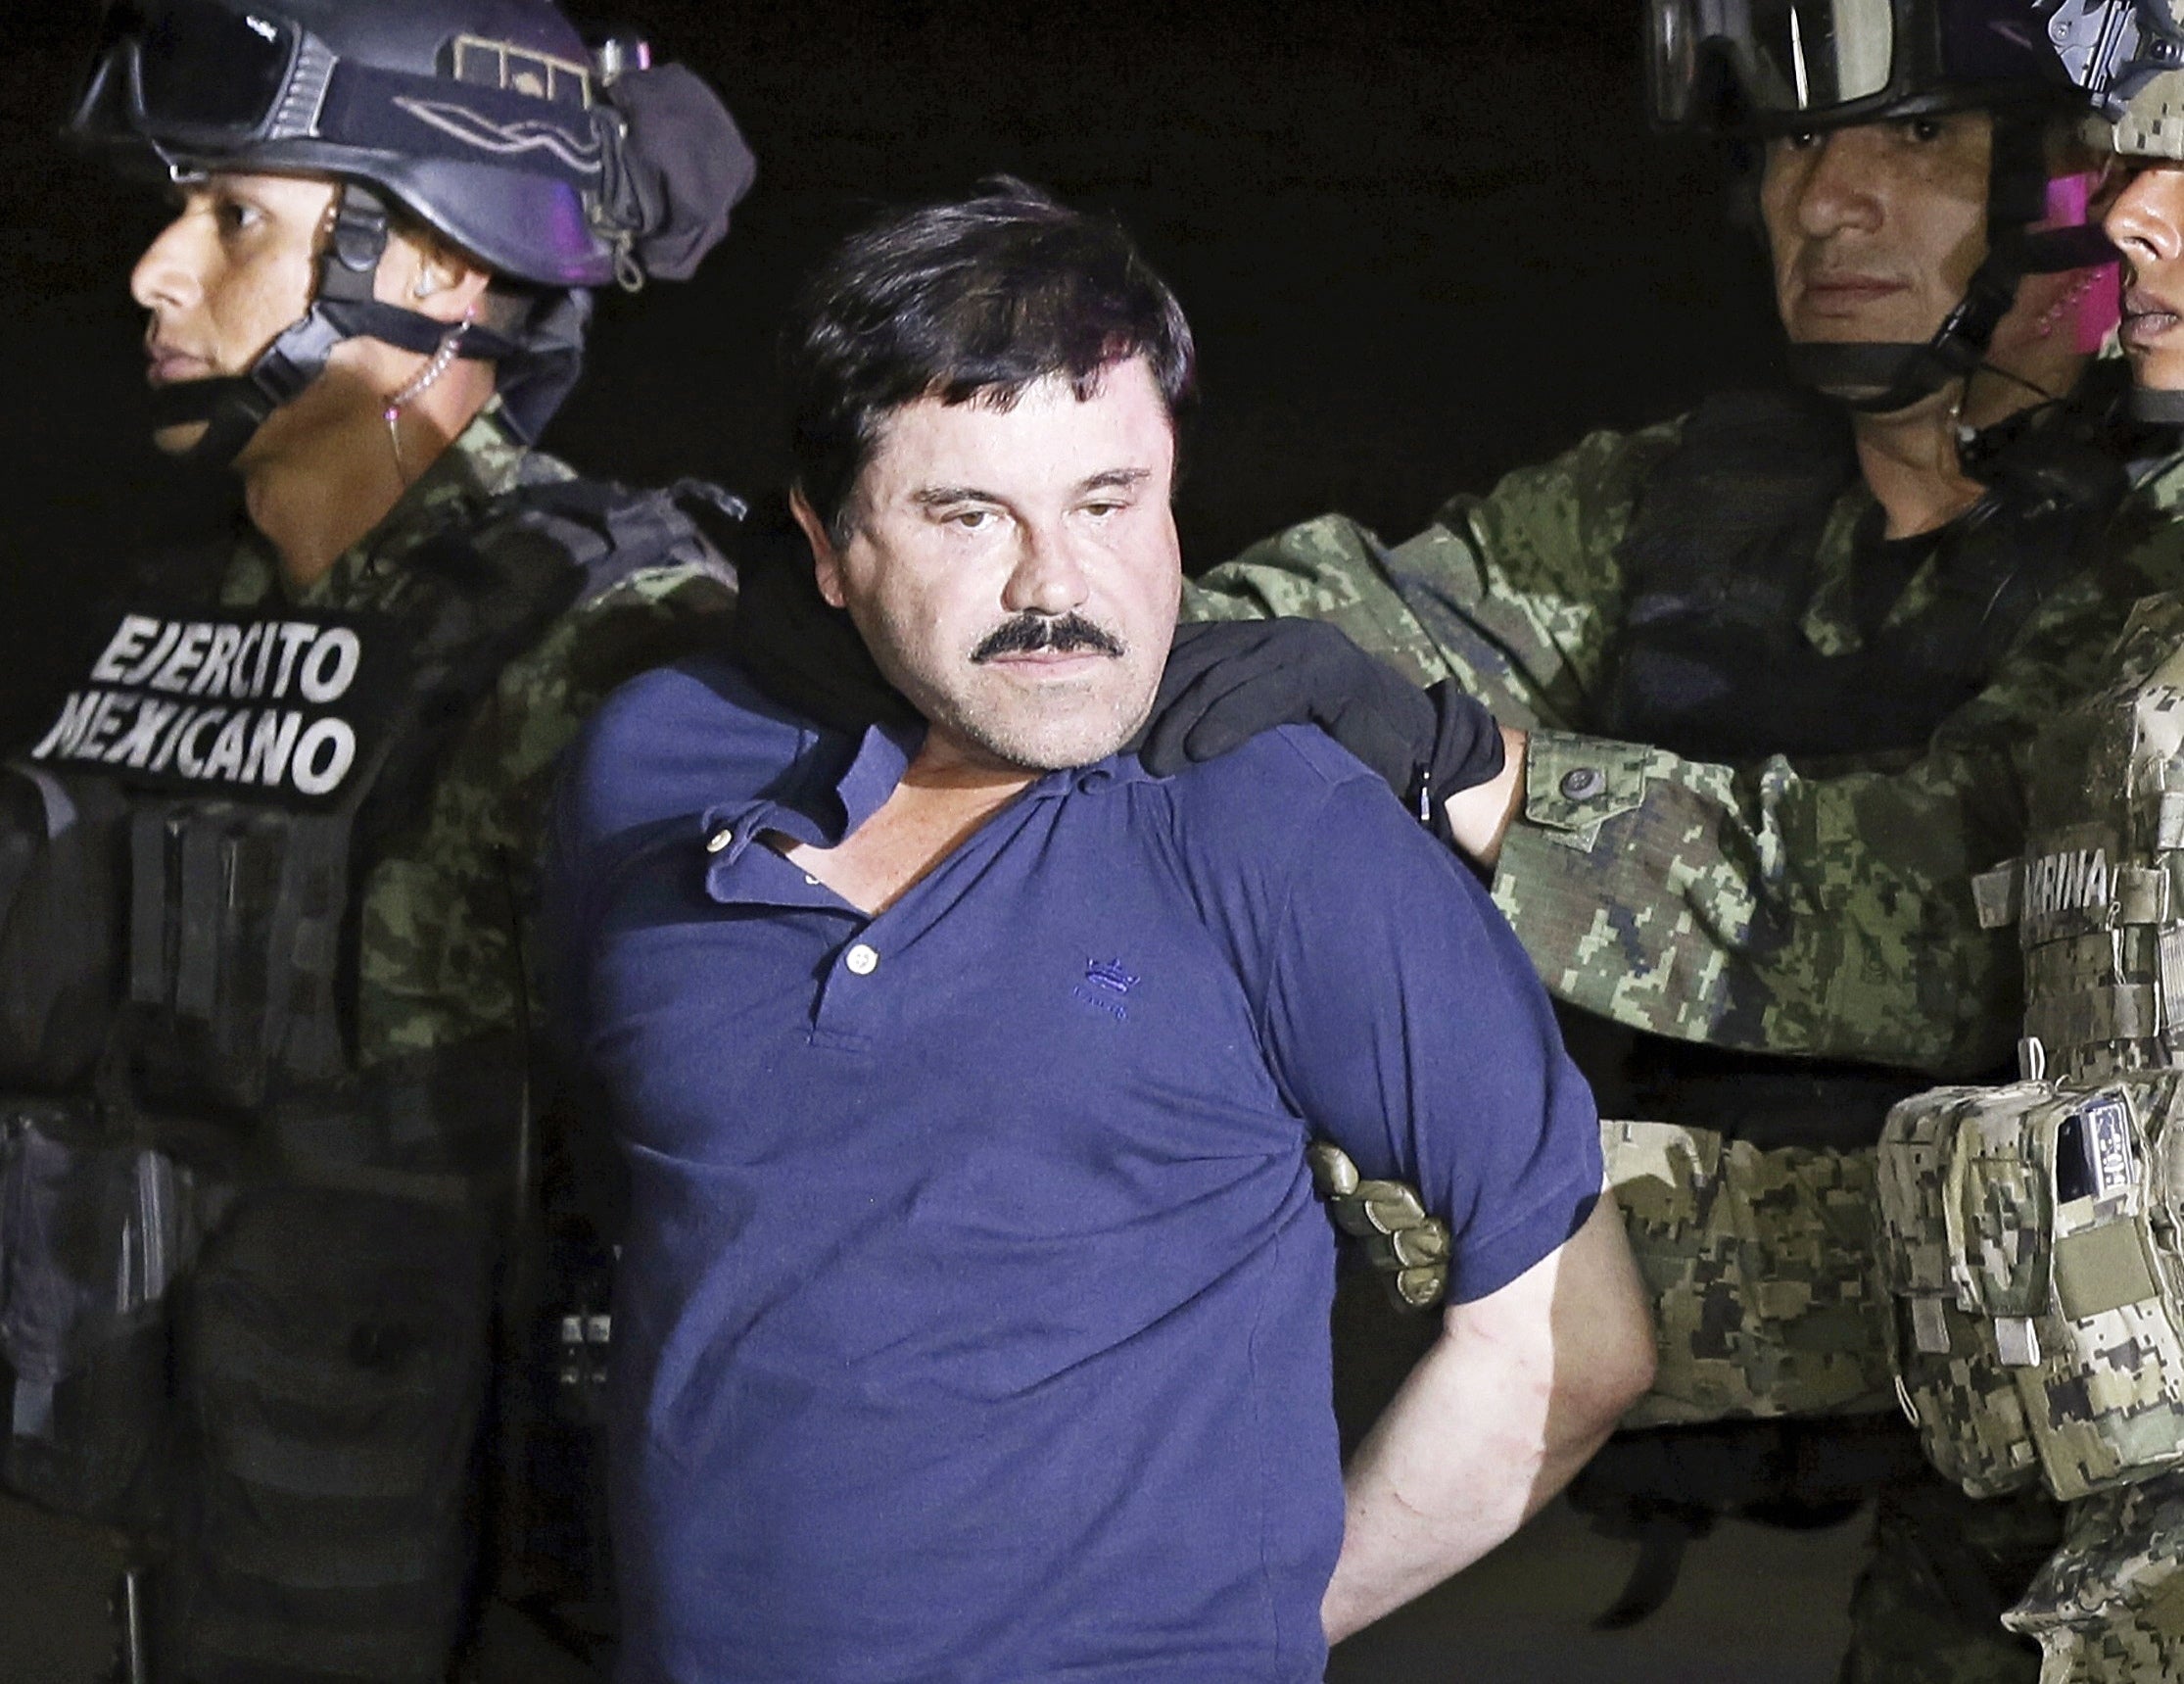 Where is el chapo right now